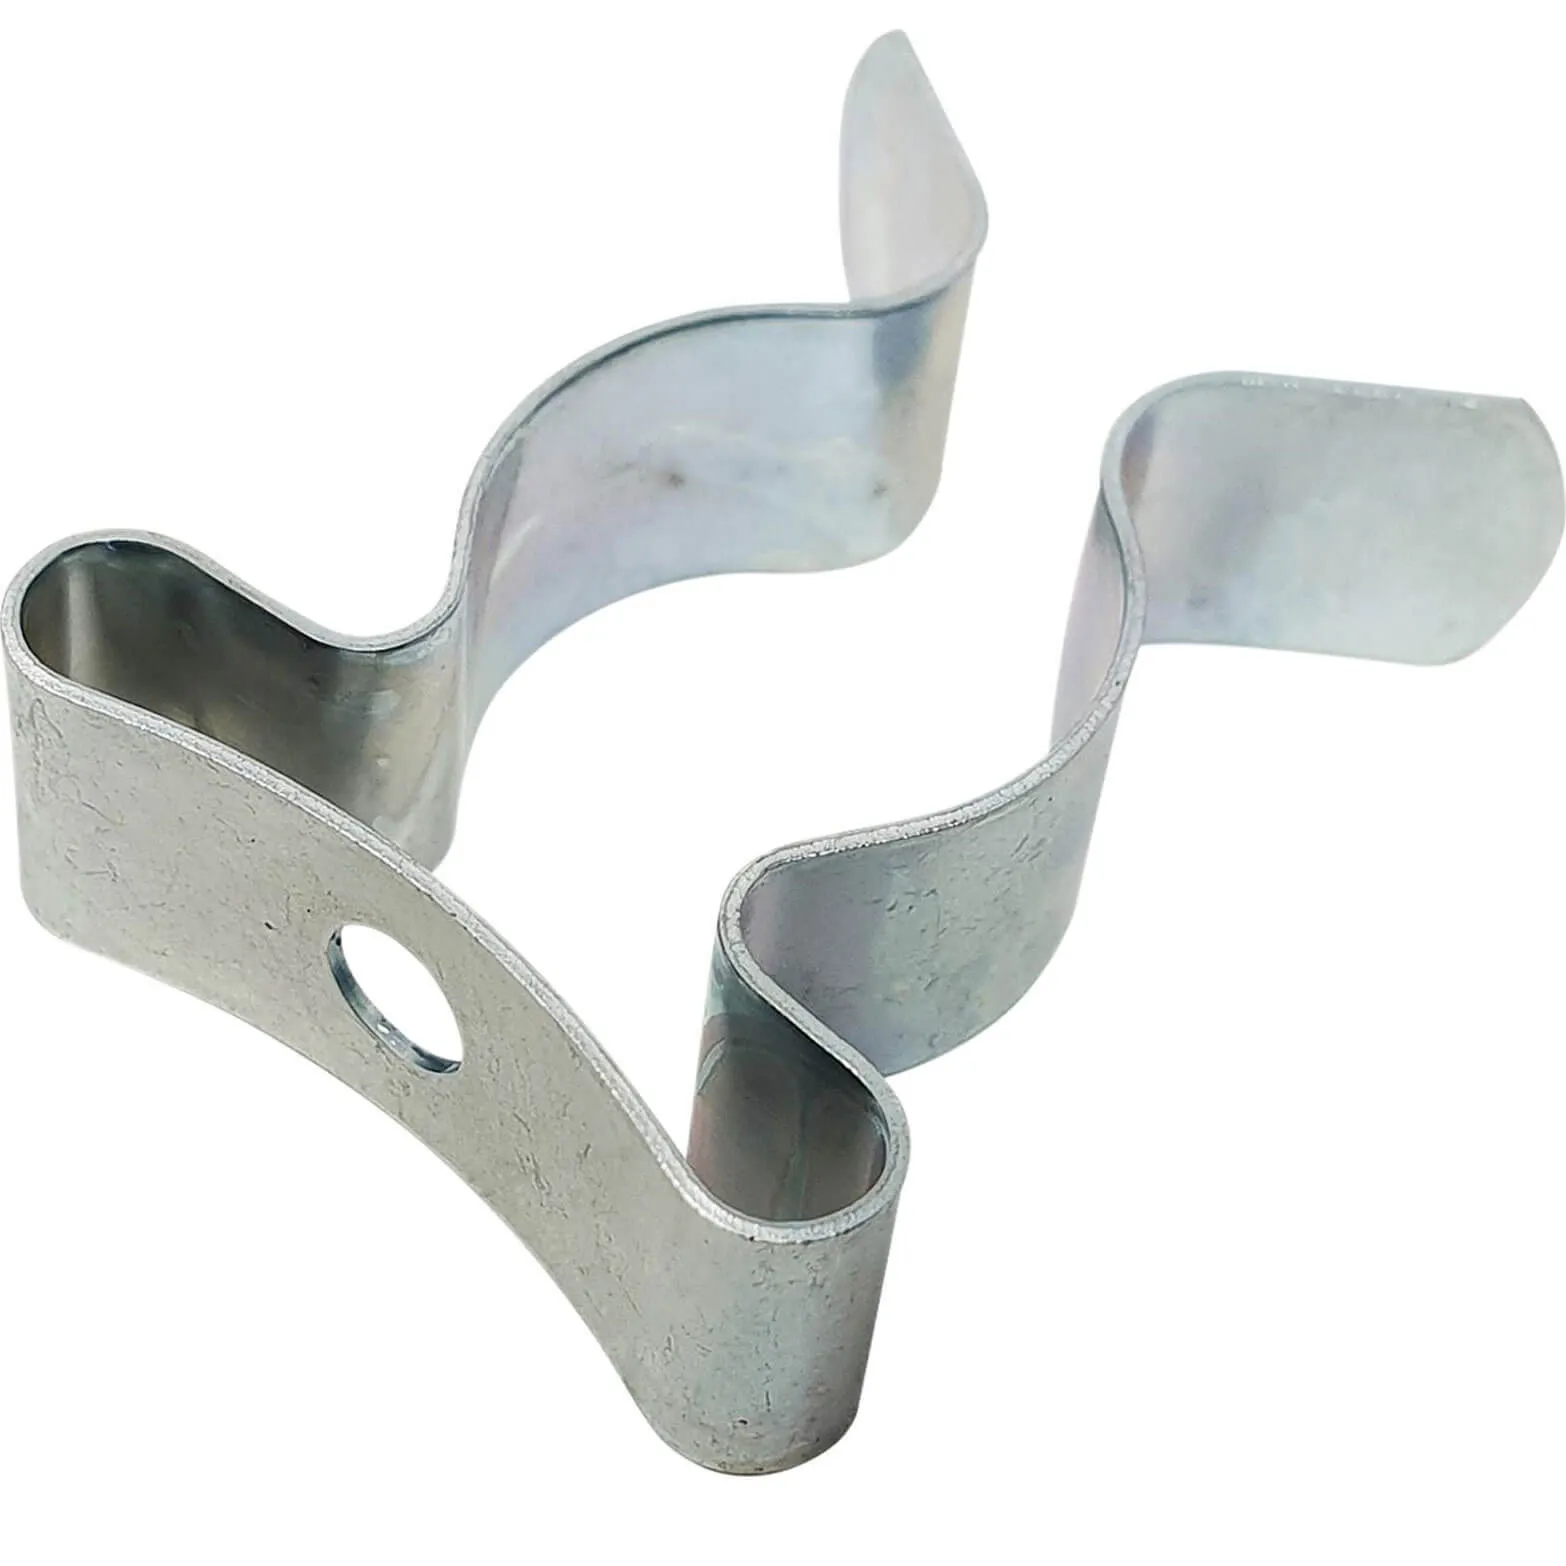 Forgefix Zinc Plated Tool Clips - 9.5mm, Pack of 25